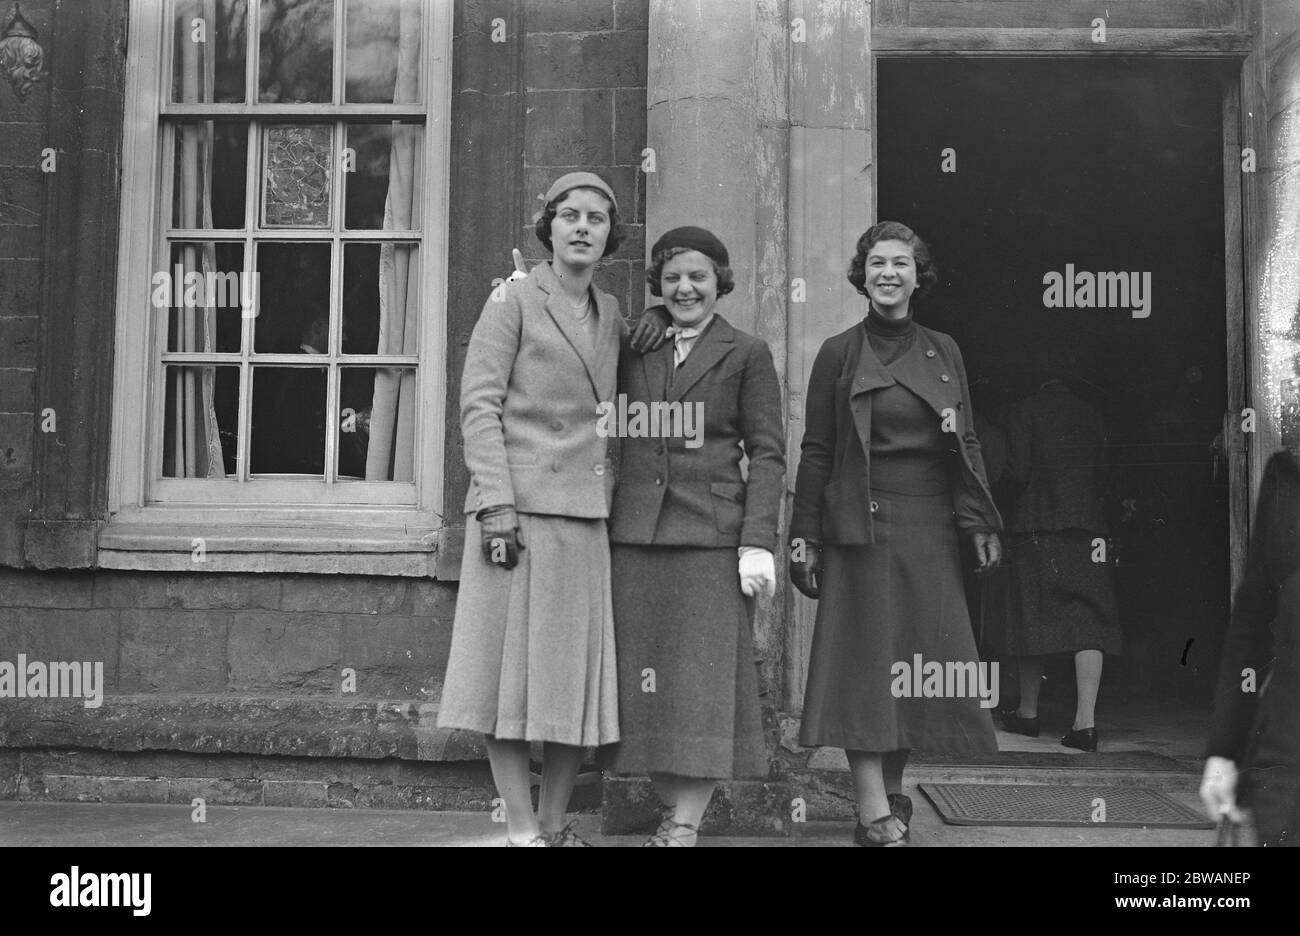 Meet of the Warwickshire hunt at Upton House Miss A Faudell Phillips , Miss Faudel Phillips and Miss Rosemary Rothschild 1932 Stock Photo